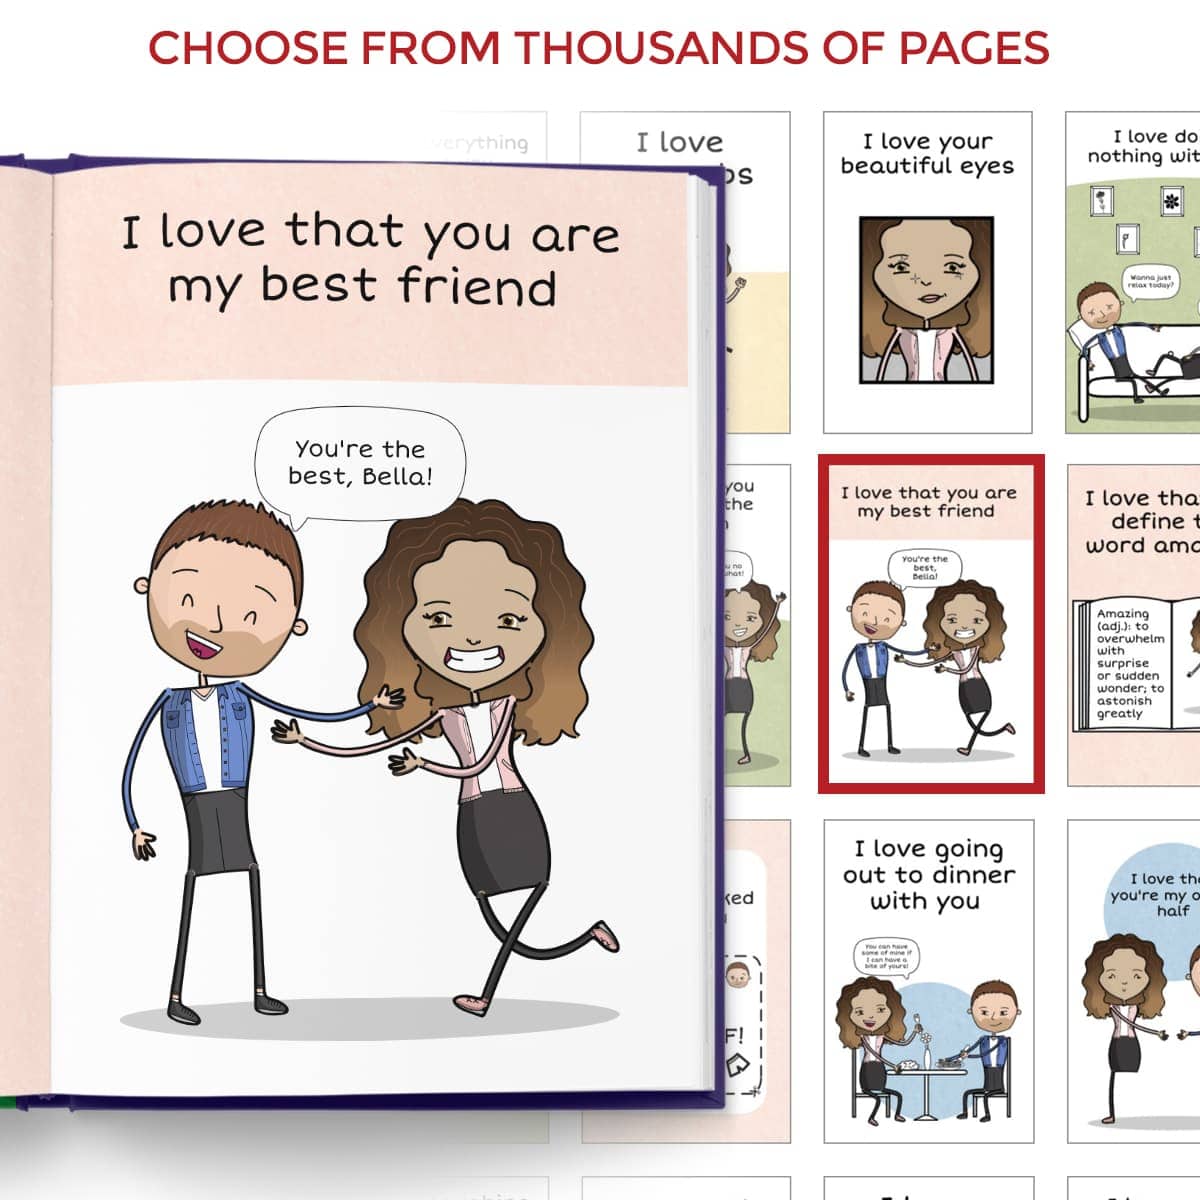 Christmas Gifts by LoveBook | The Personalized Gift Book That Says Why You Love Someone | LoveBook Online - 2